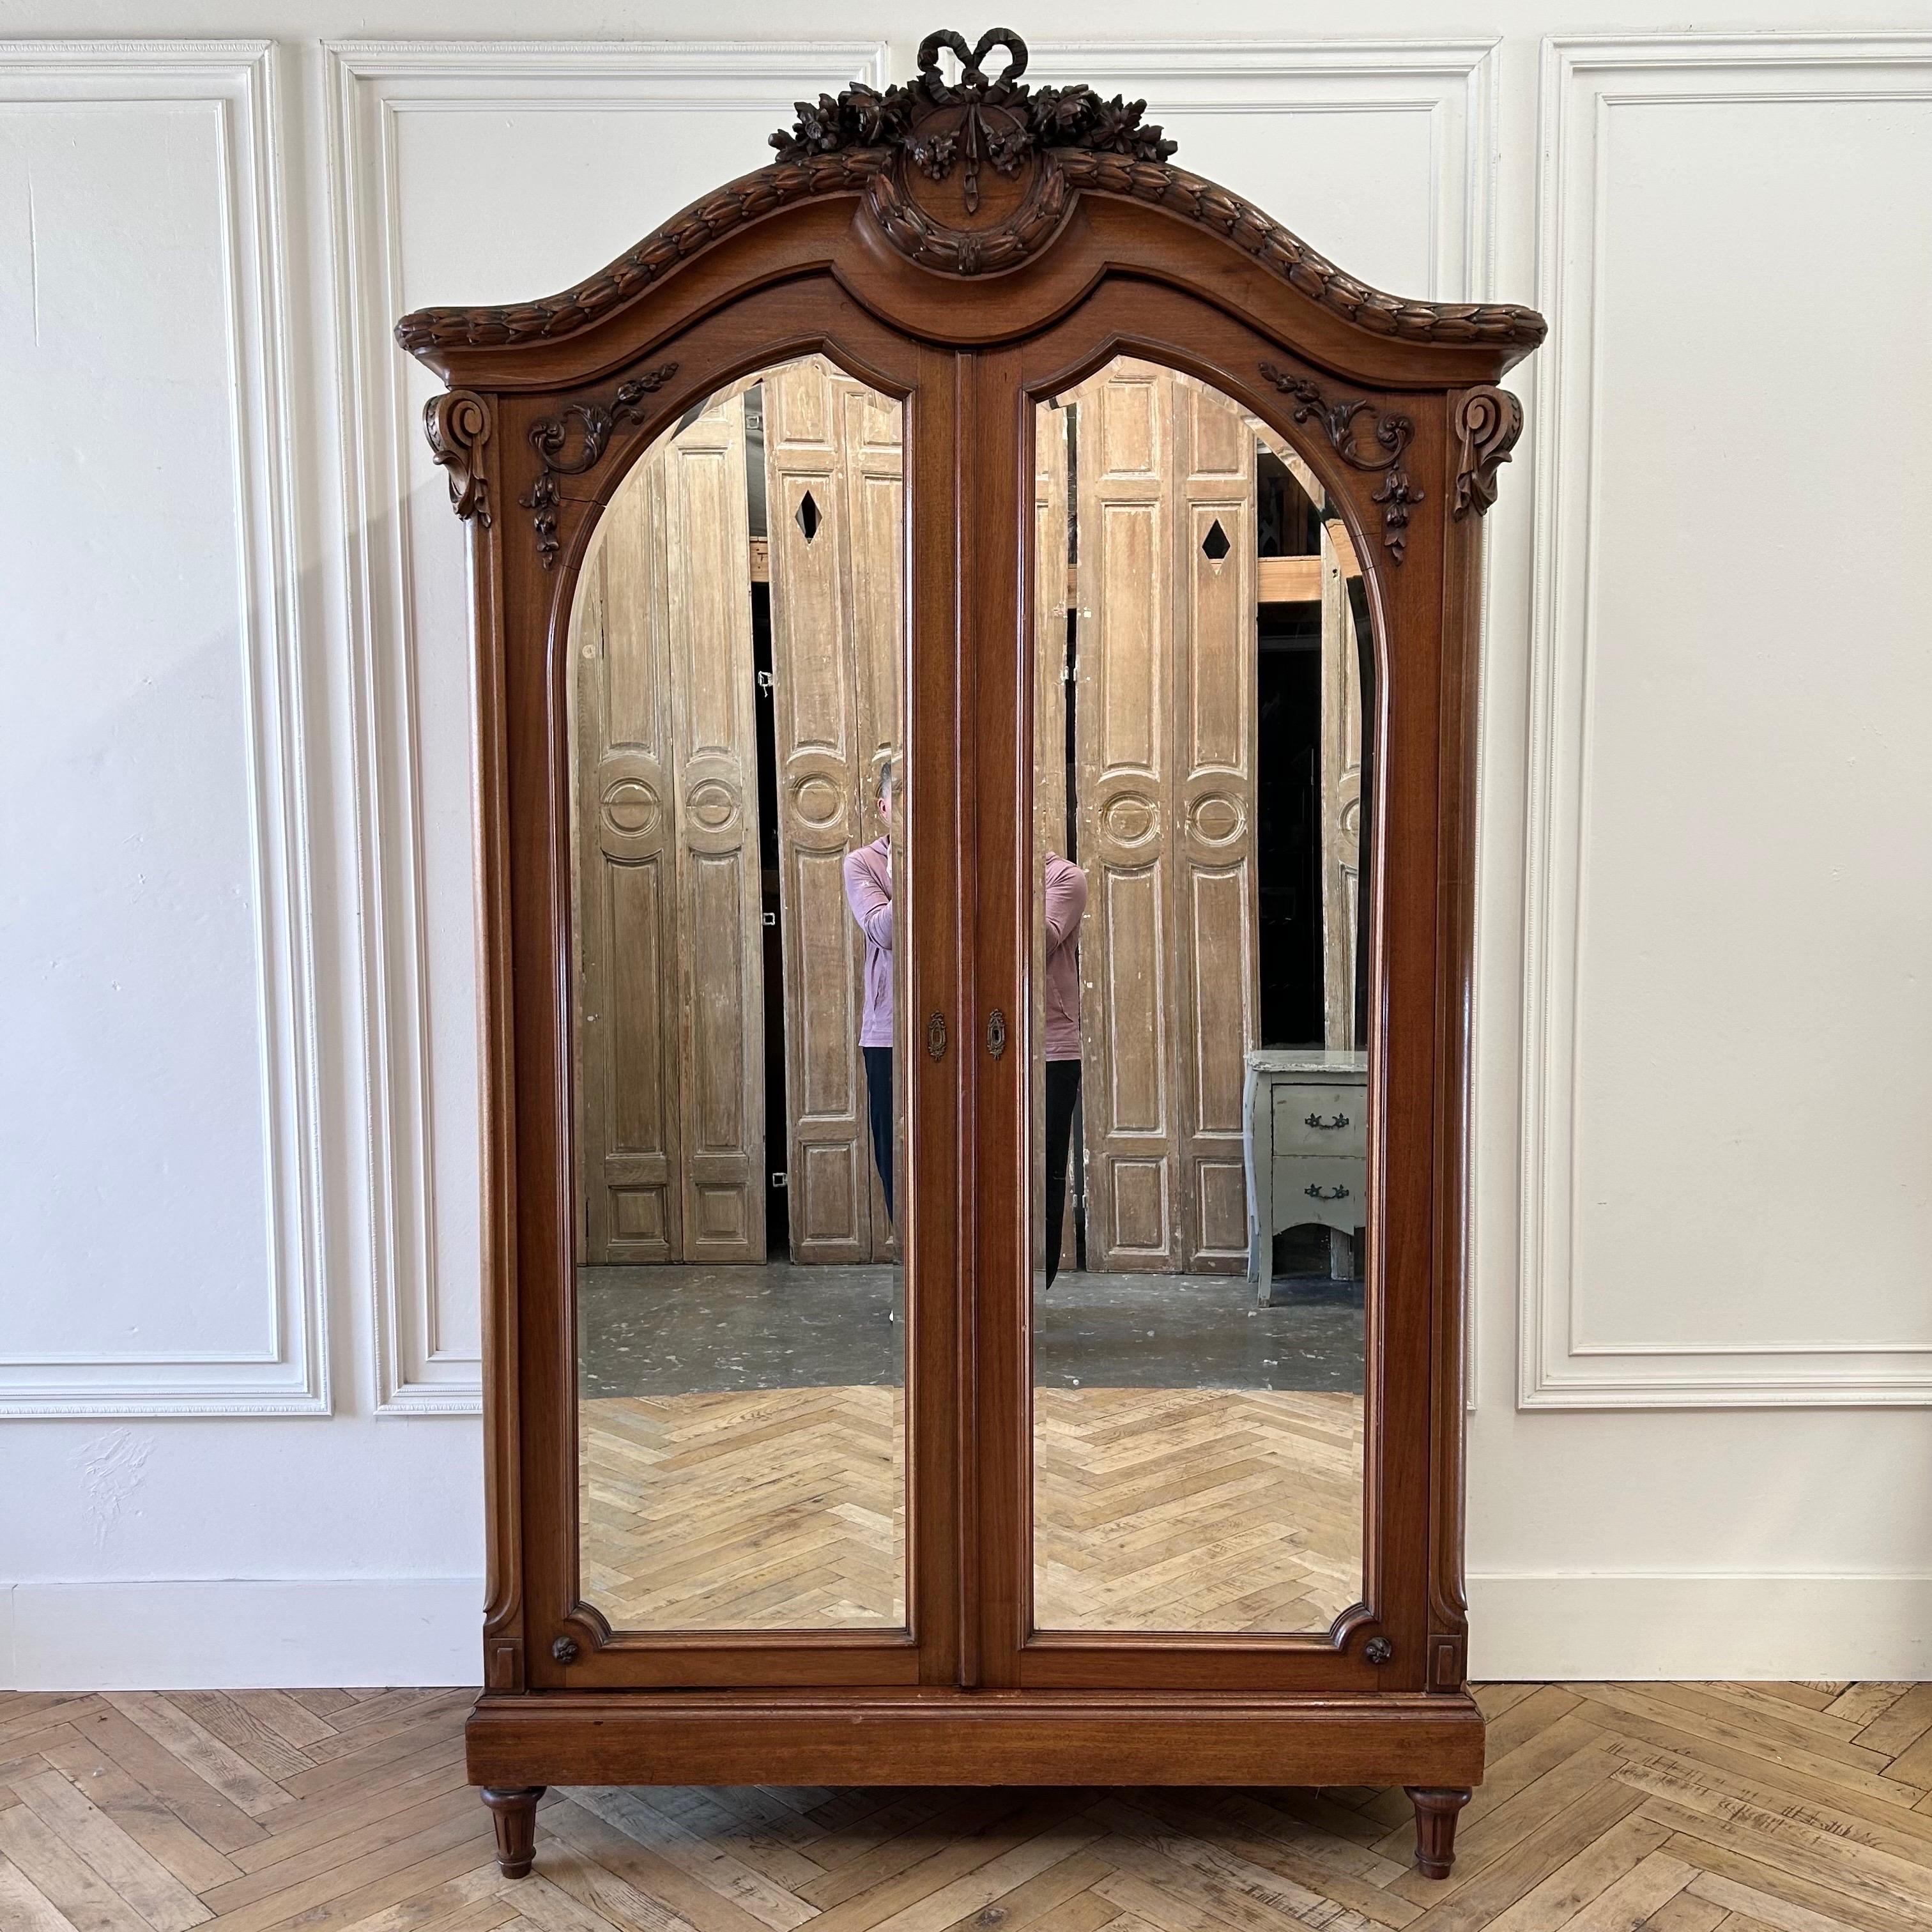 Armoire 60”w x 25”d x 100”h
Inside:53”w x 20”d
Rod:74”h from inside bottom 
Antique French Louis XVI Style Armoire with Ribbon And rose carvings.
Double door with mirrors, open and close with ease.
Inside has a hanging rod. Armoire does come